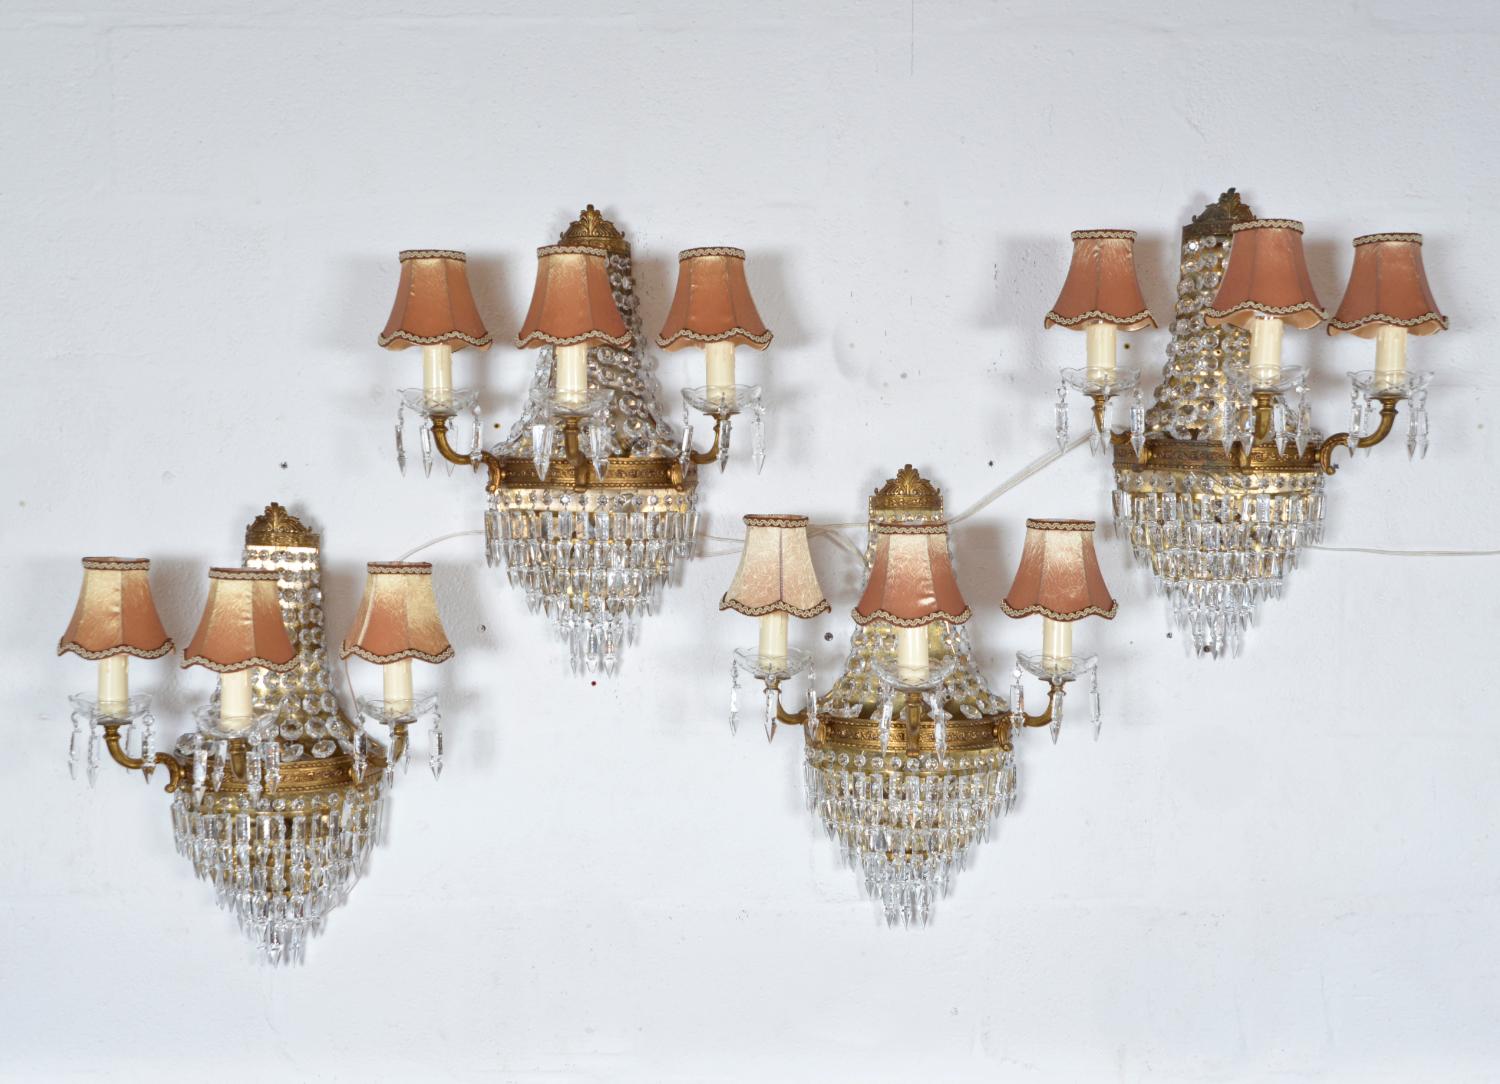 A substantial set of four stunning French wall mounted chandeliers with generous strings of cut crystal prisms and multi faceted octagon crystal beads.
Each chandelier sconce has three gilt brass arms, each with a cut glass candle cup from which